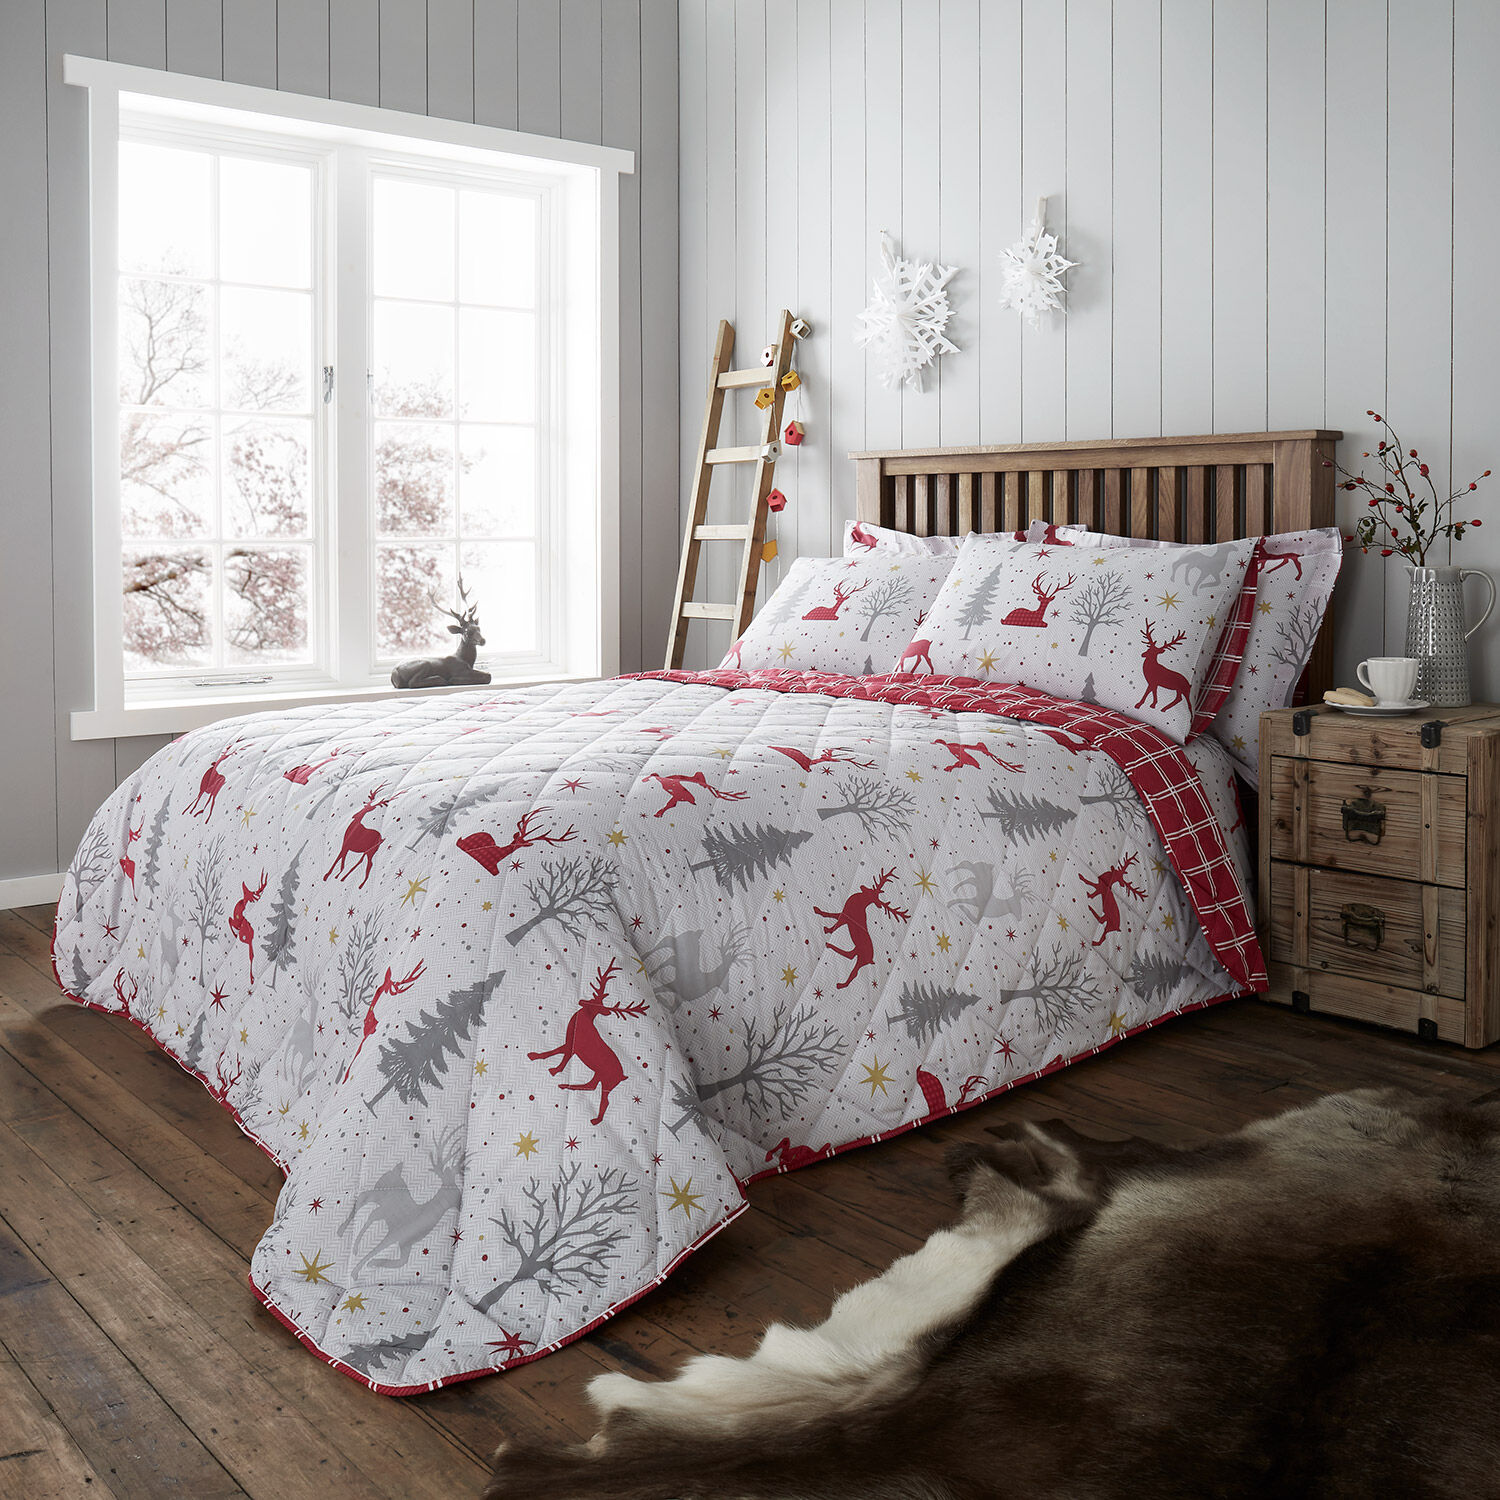 Starry Stag Bed Linen Home More, Stag Duvet Cover